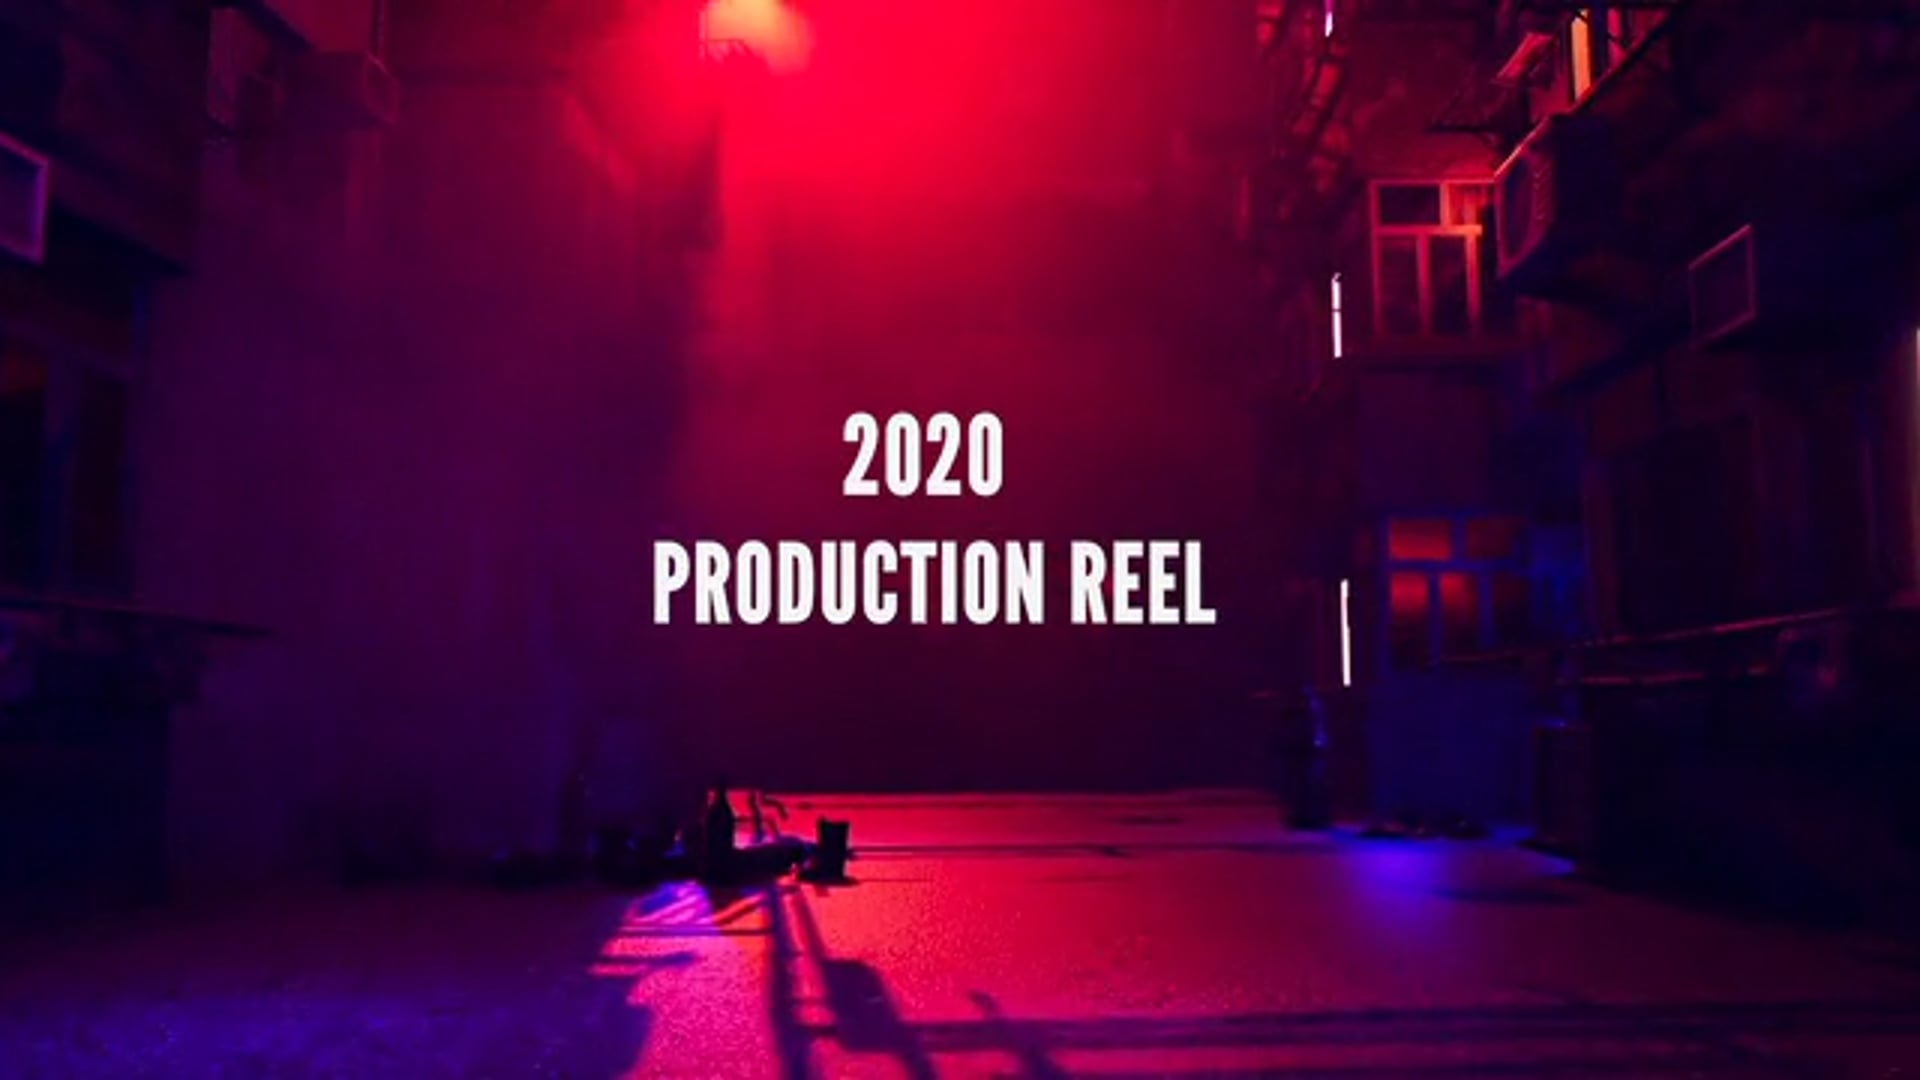 Soft Cage Films - Production Reel (Feb '20 update)